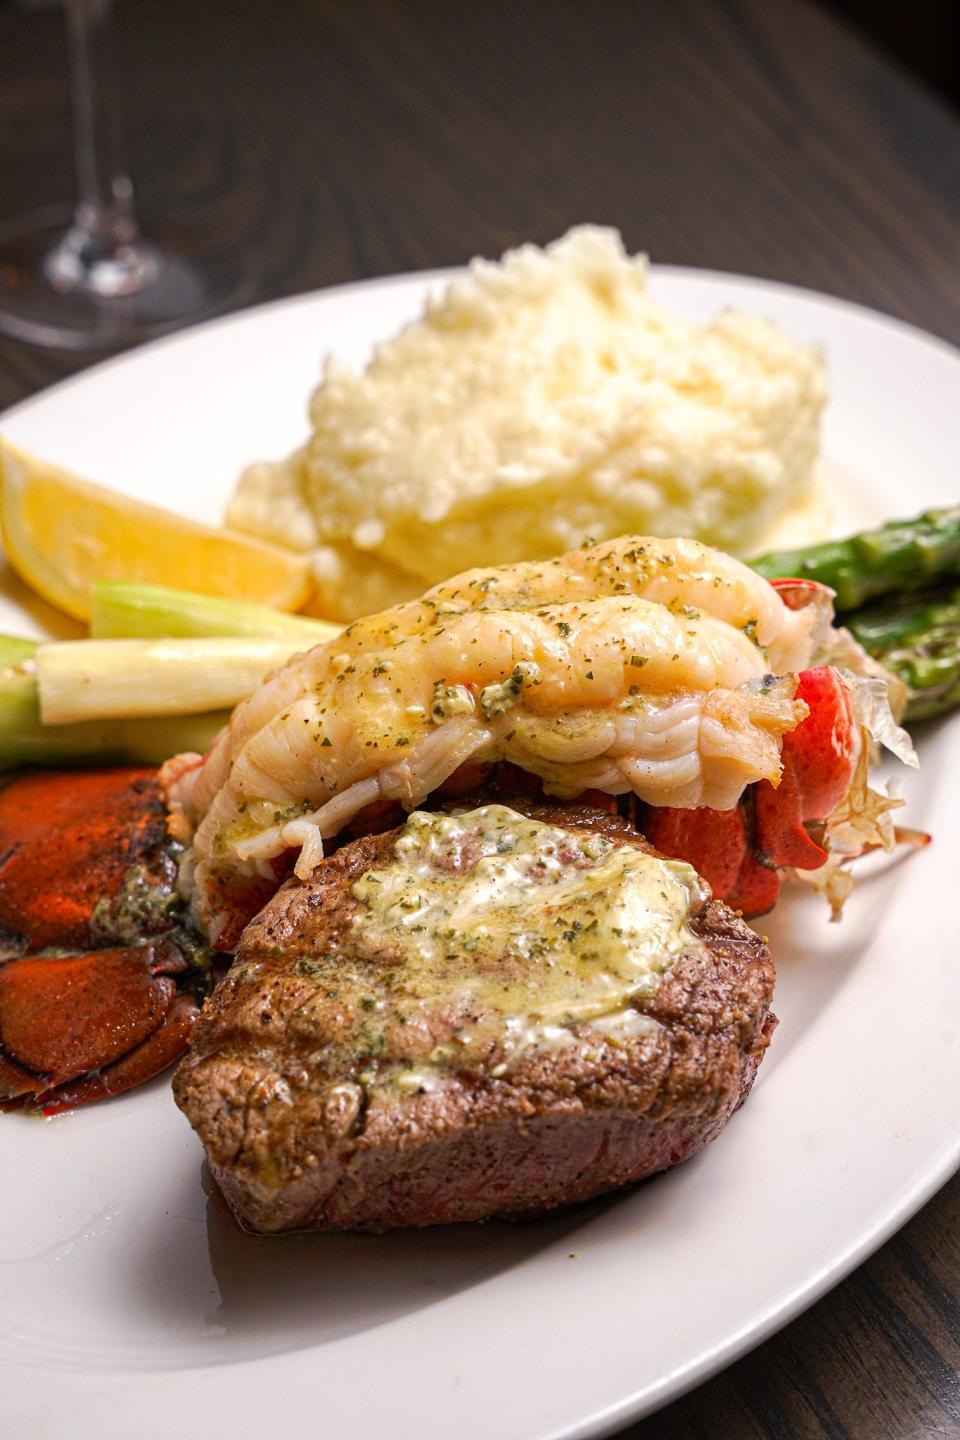 Show dad just how much you love him this Father's Day with the surf & turf at City Oyster in Delray Beach.